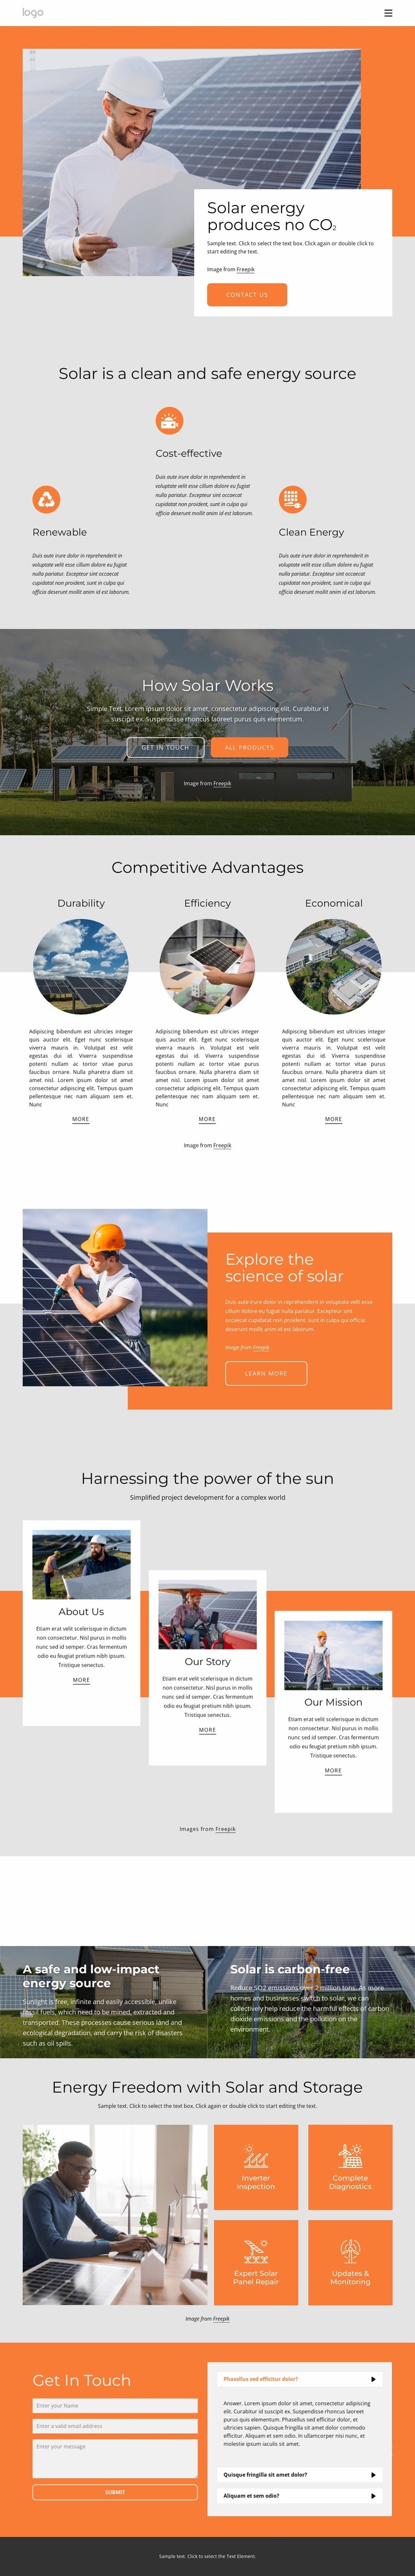 Power your home with clean solar energy Wix Template Alternative